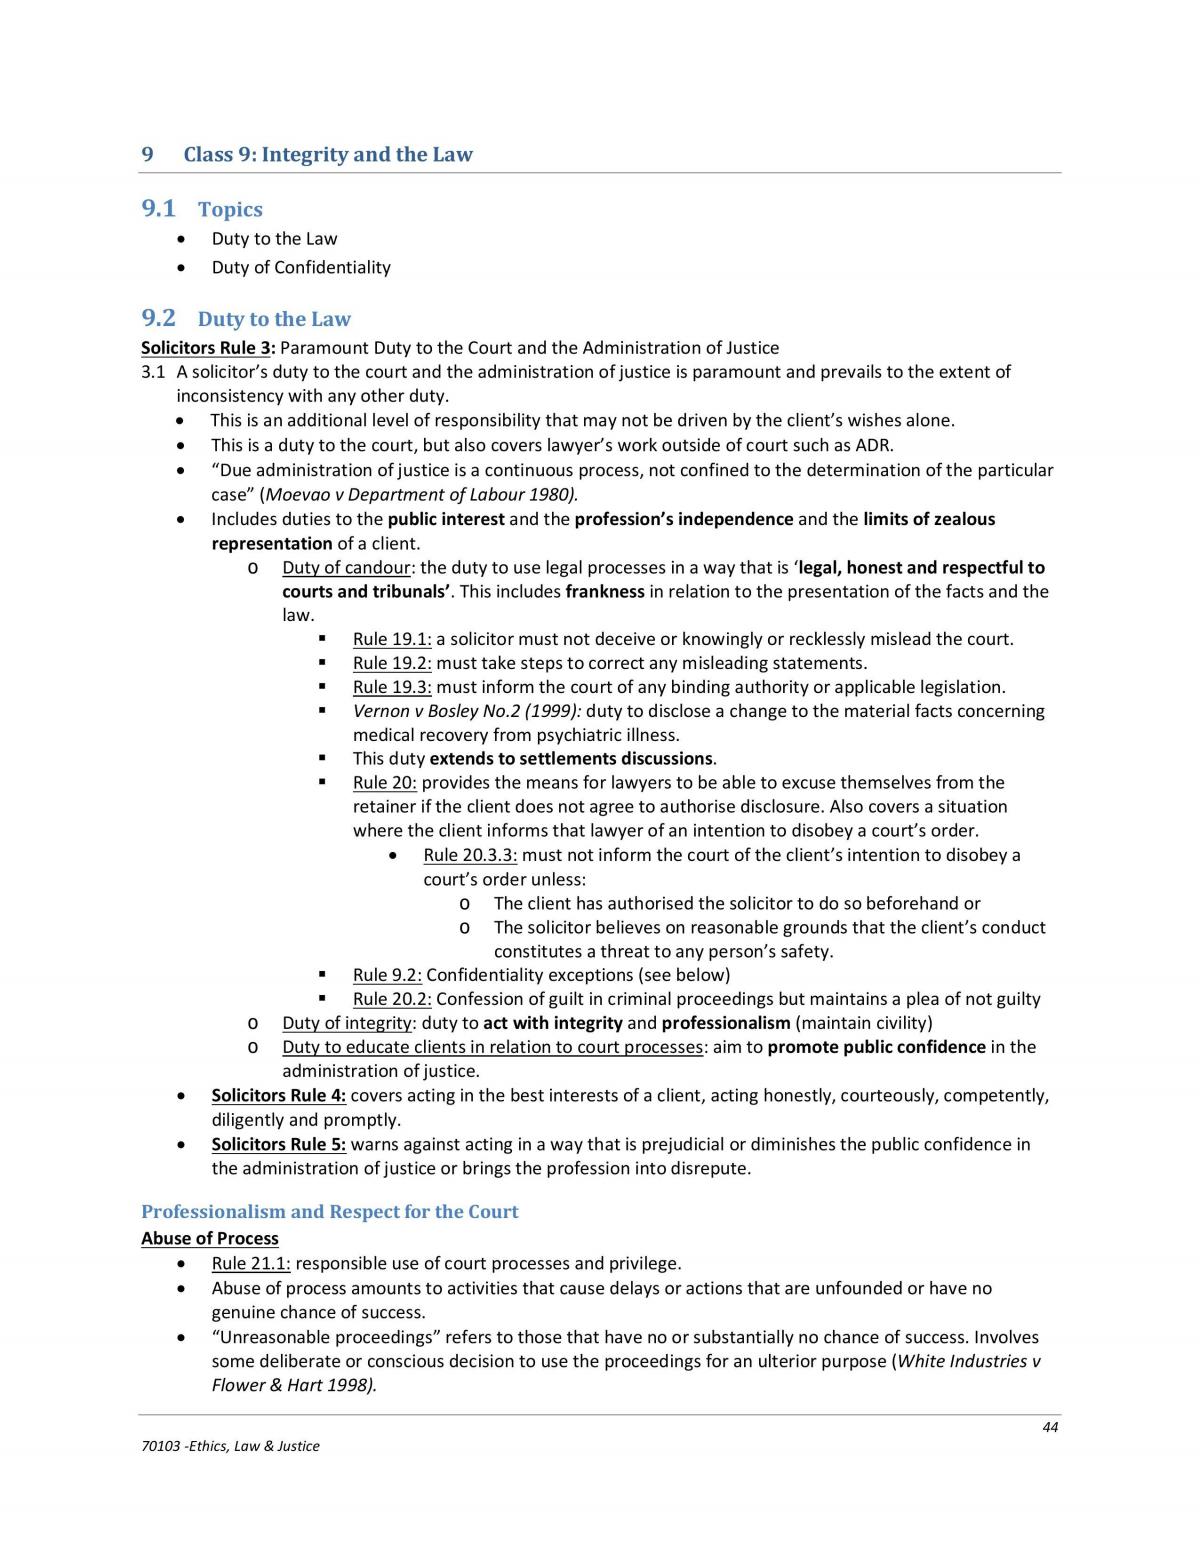 Complete Ethics, Law and Justice Notes - Page 44